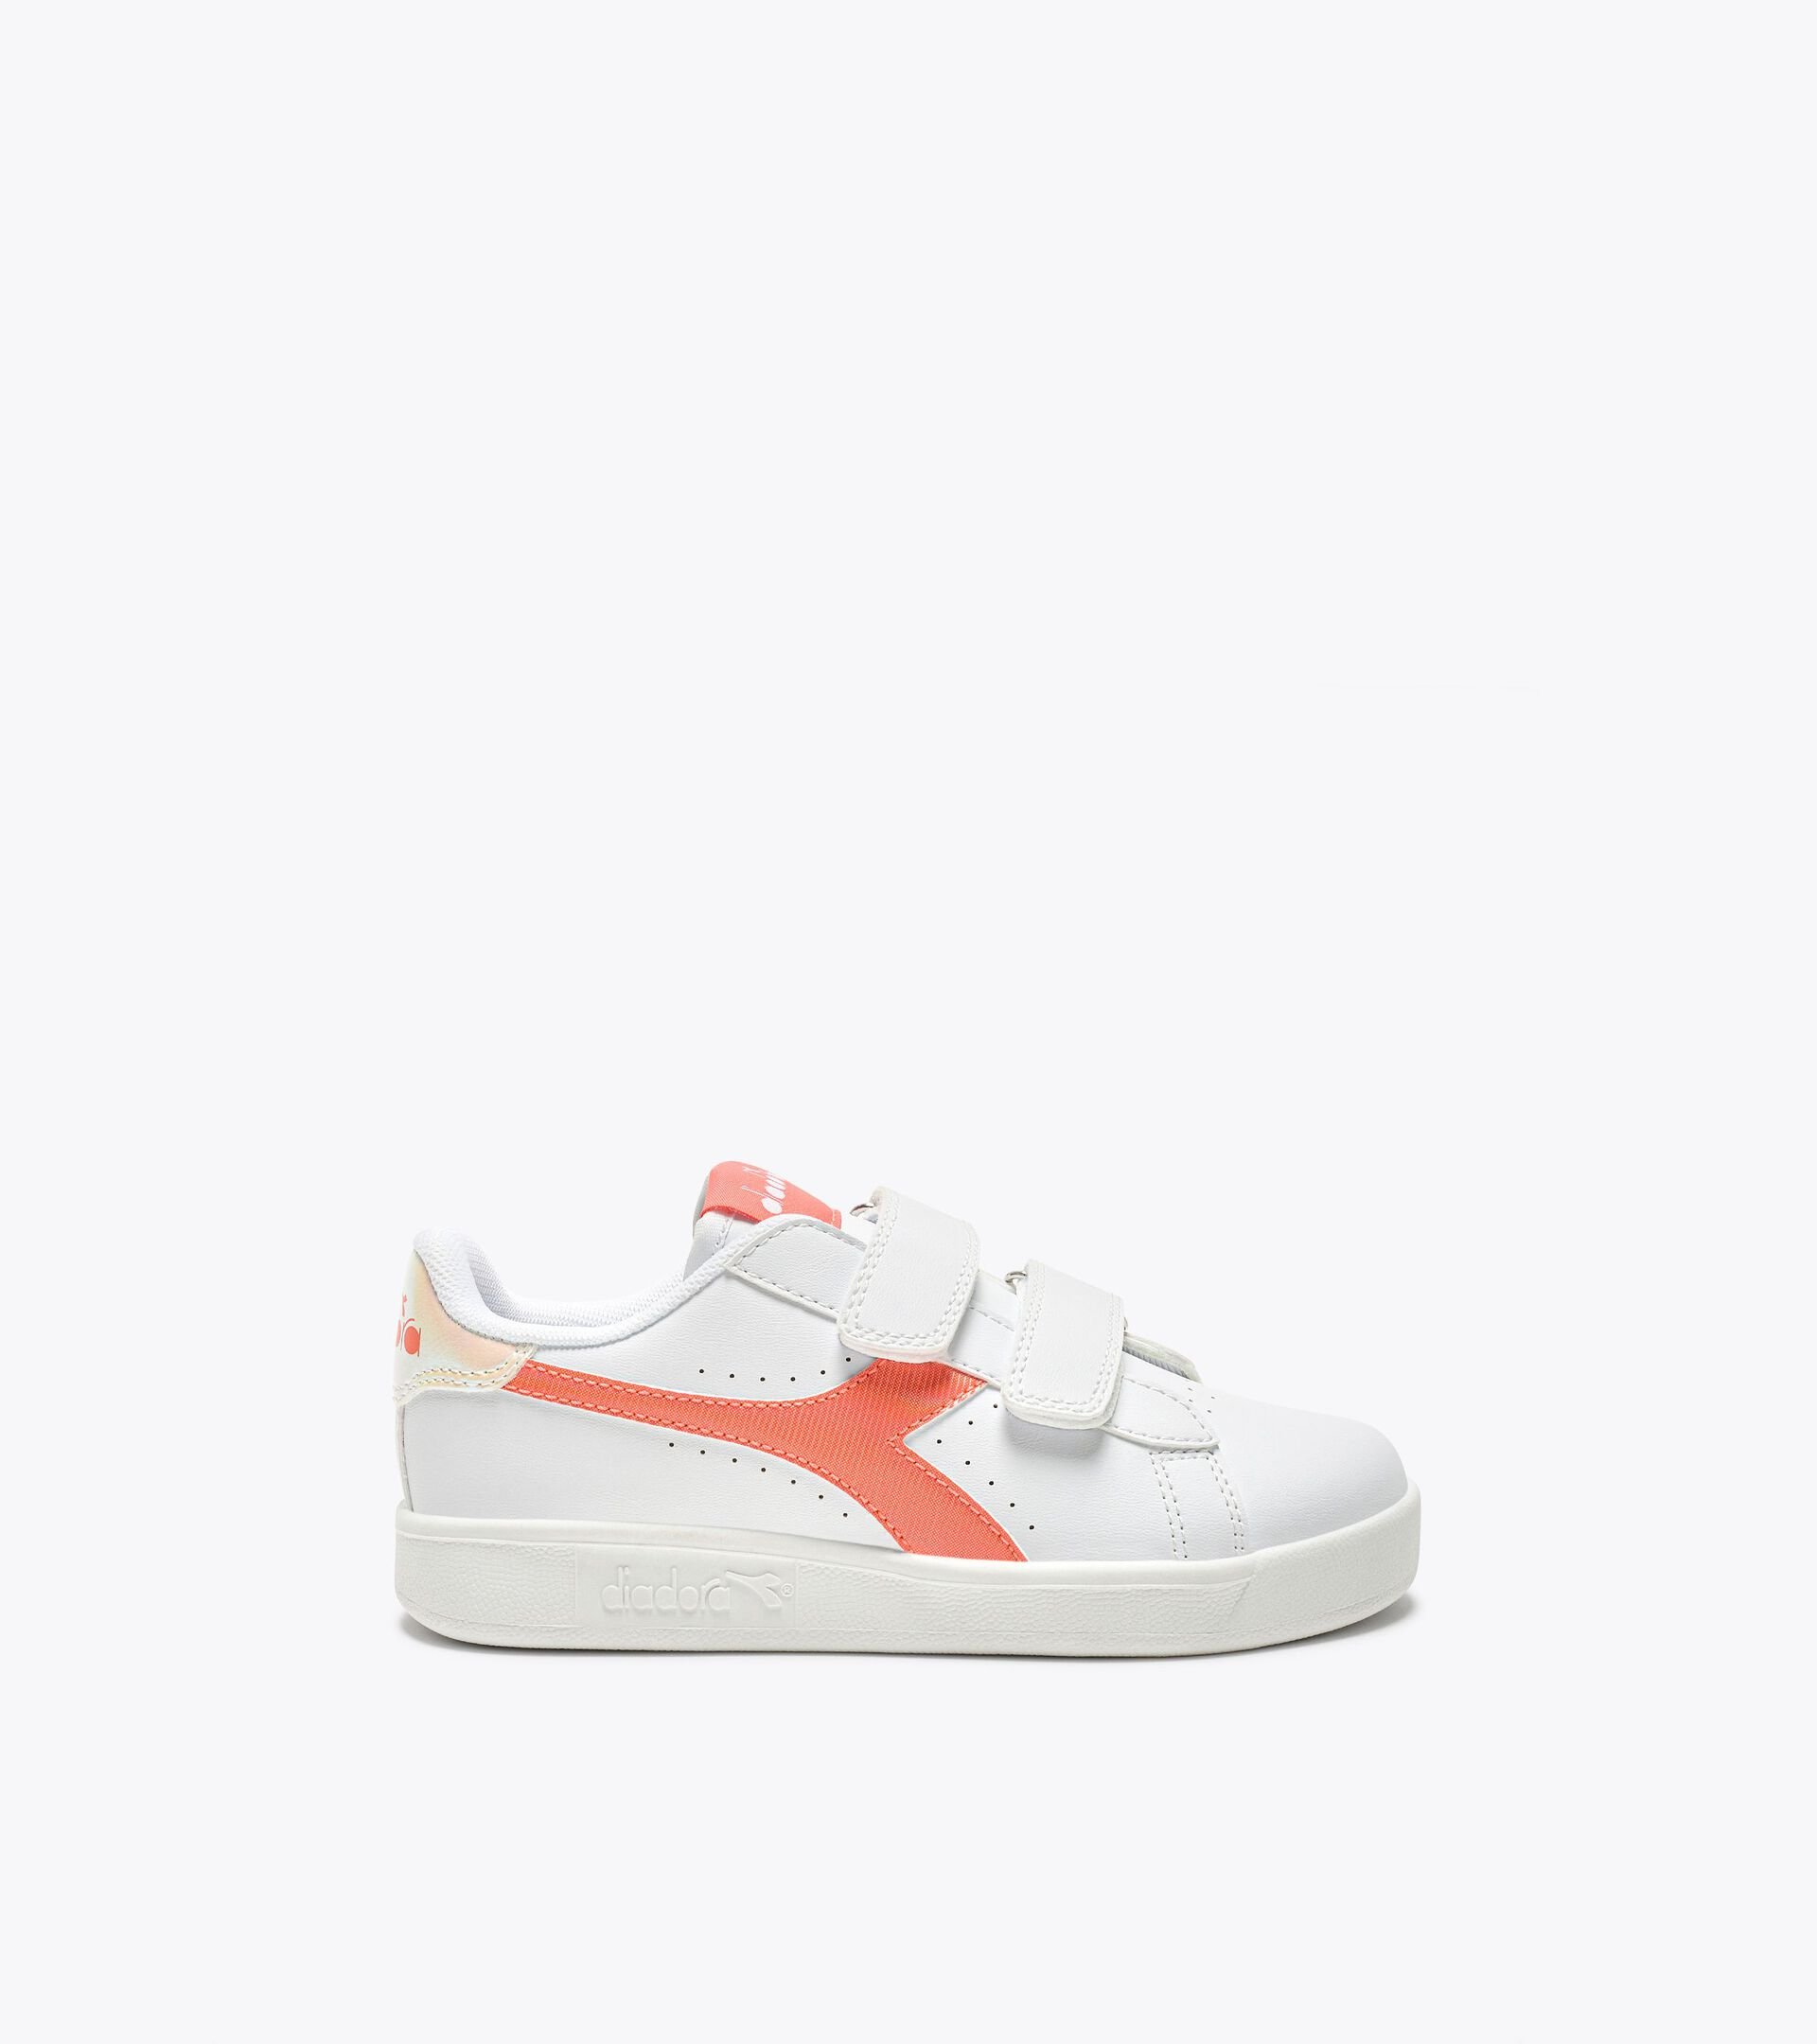 Sports shoes - Kids 4-8 years GAME P PS GIRL FUSION CORAL/WHITE - Diadora